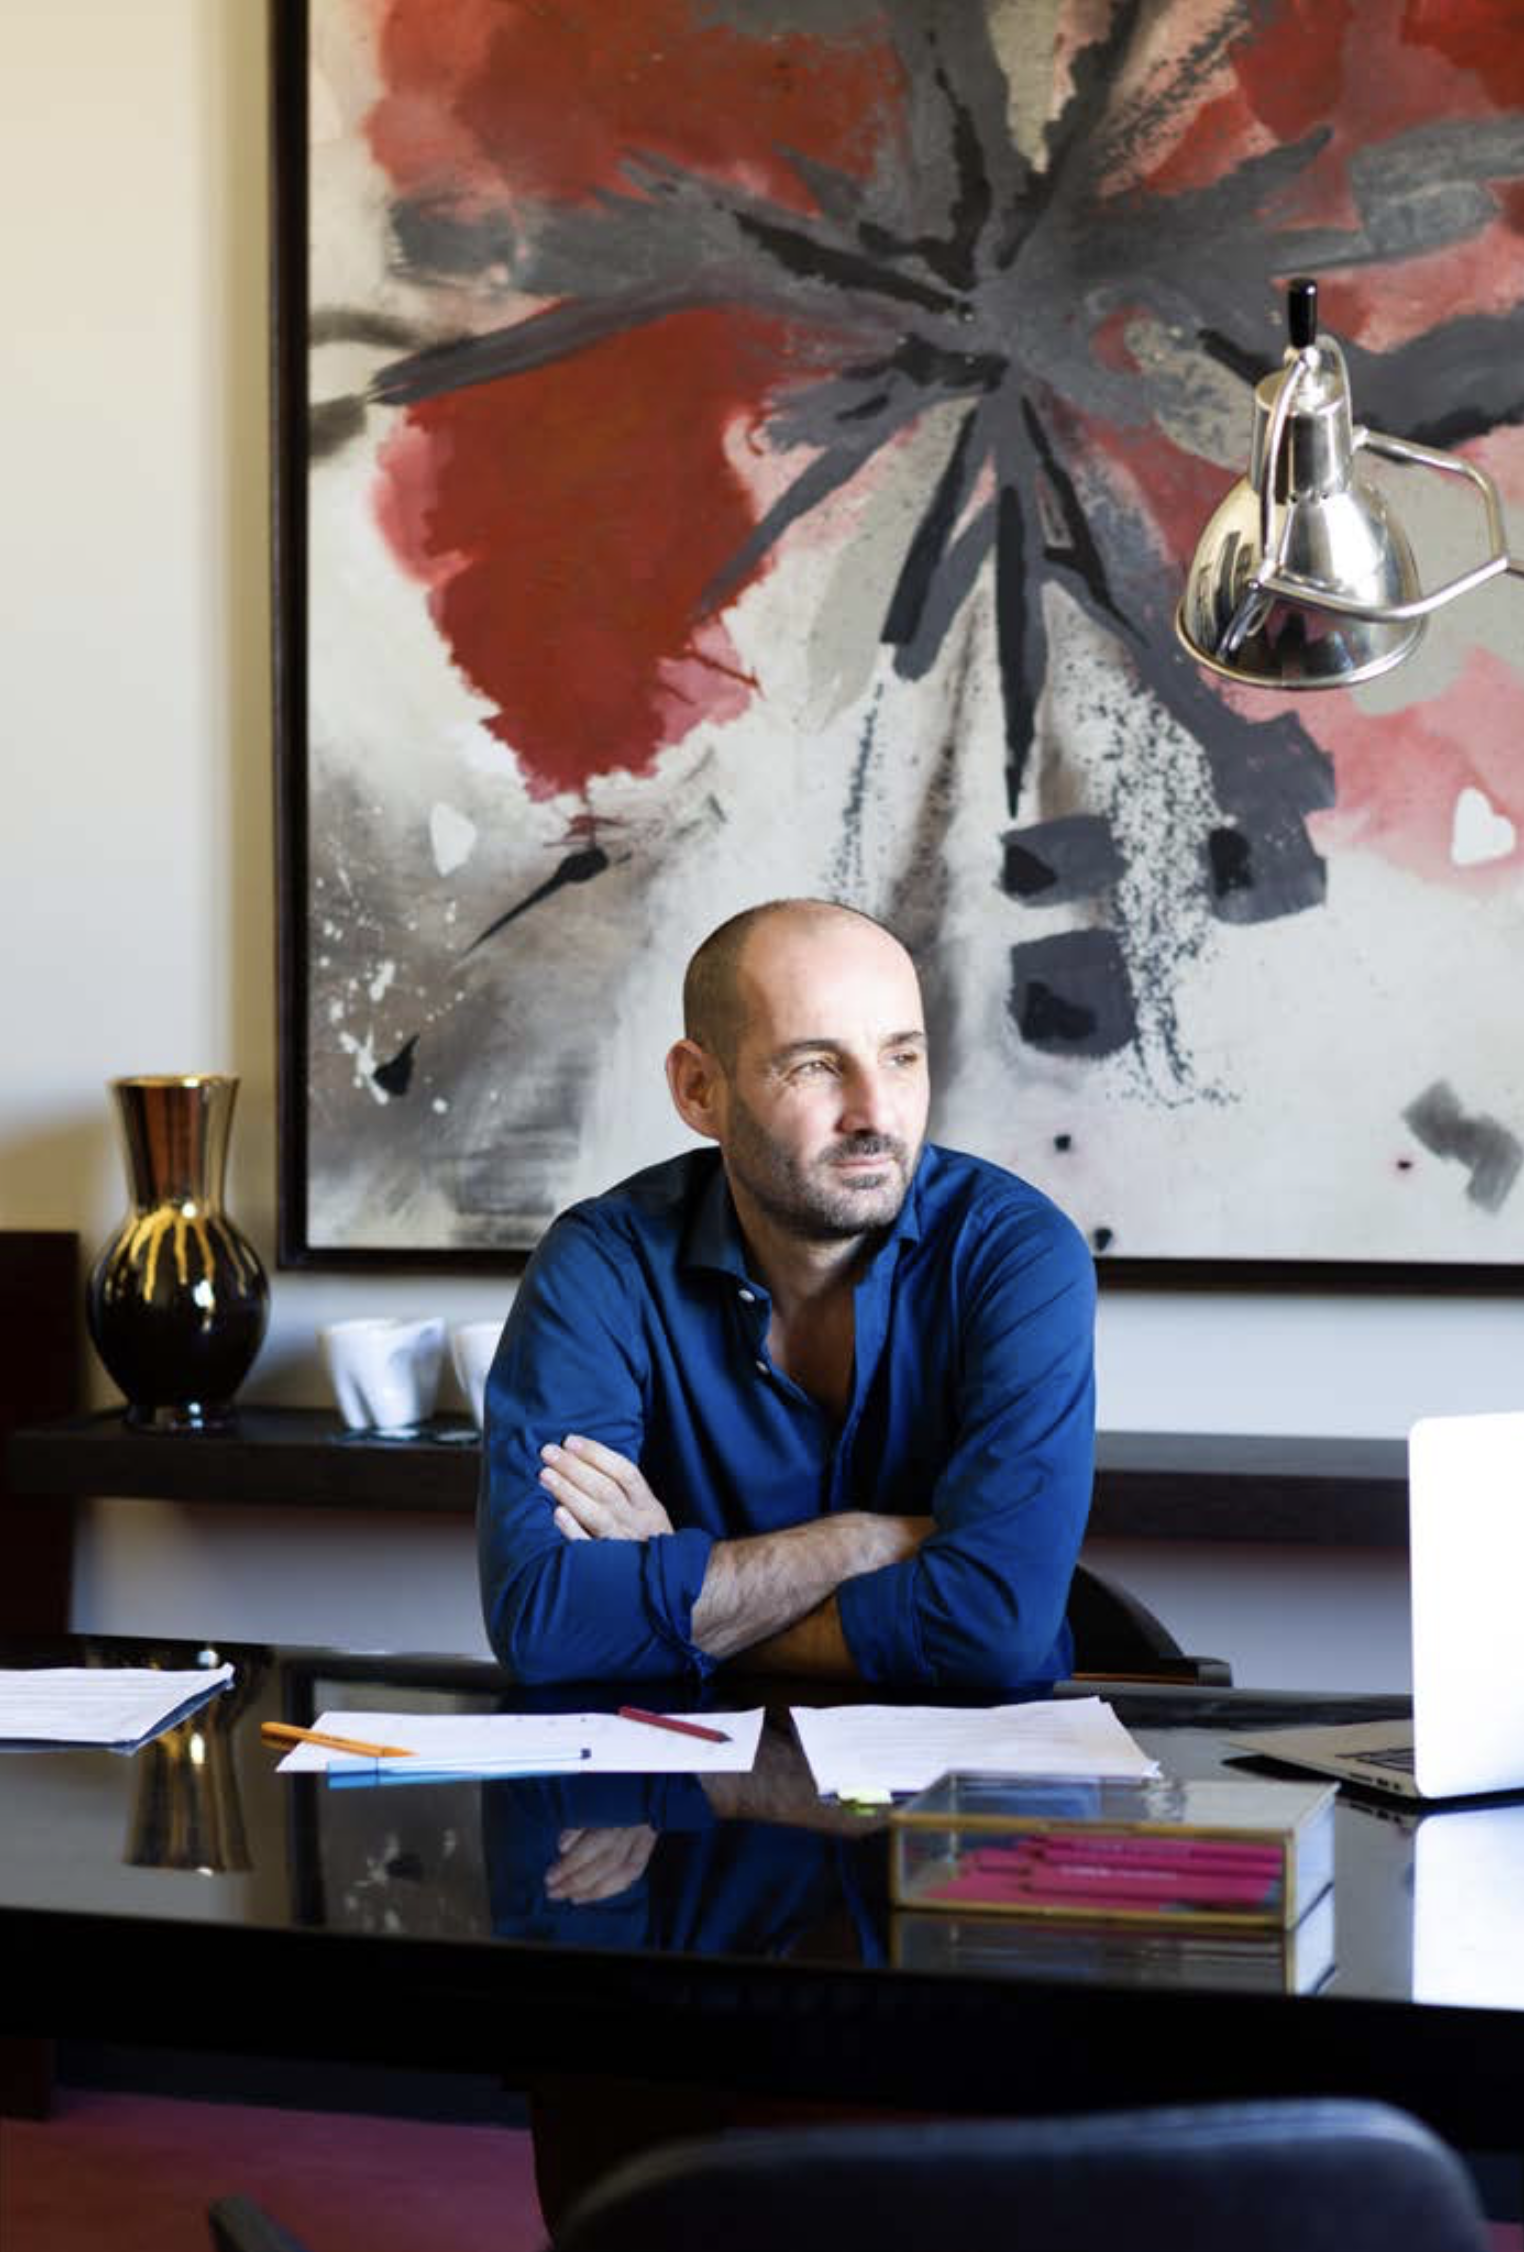 Image of Luigi Fragola, expert in the fields of interior design and architecture with a studio based in Florence